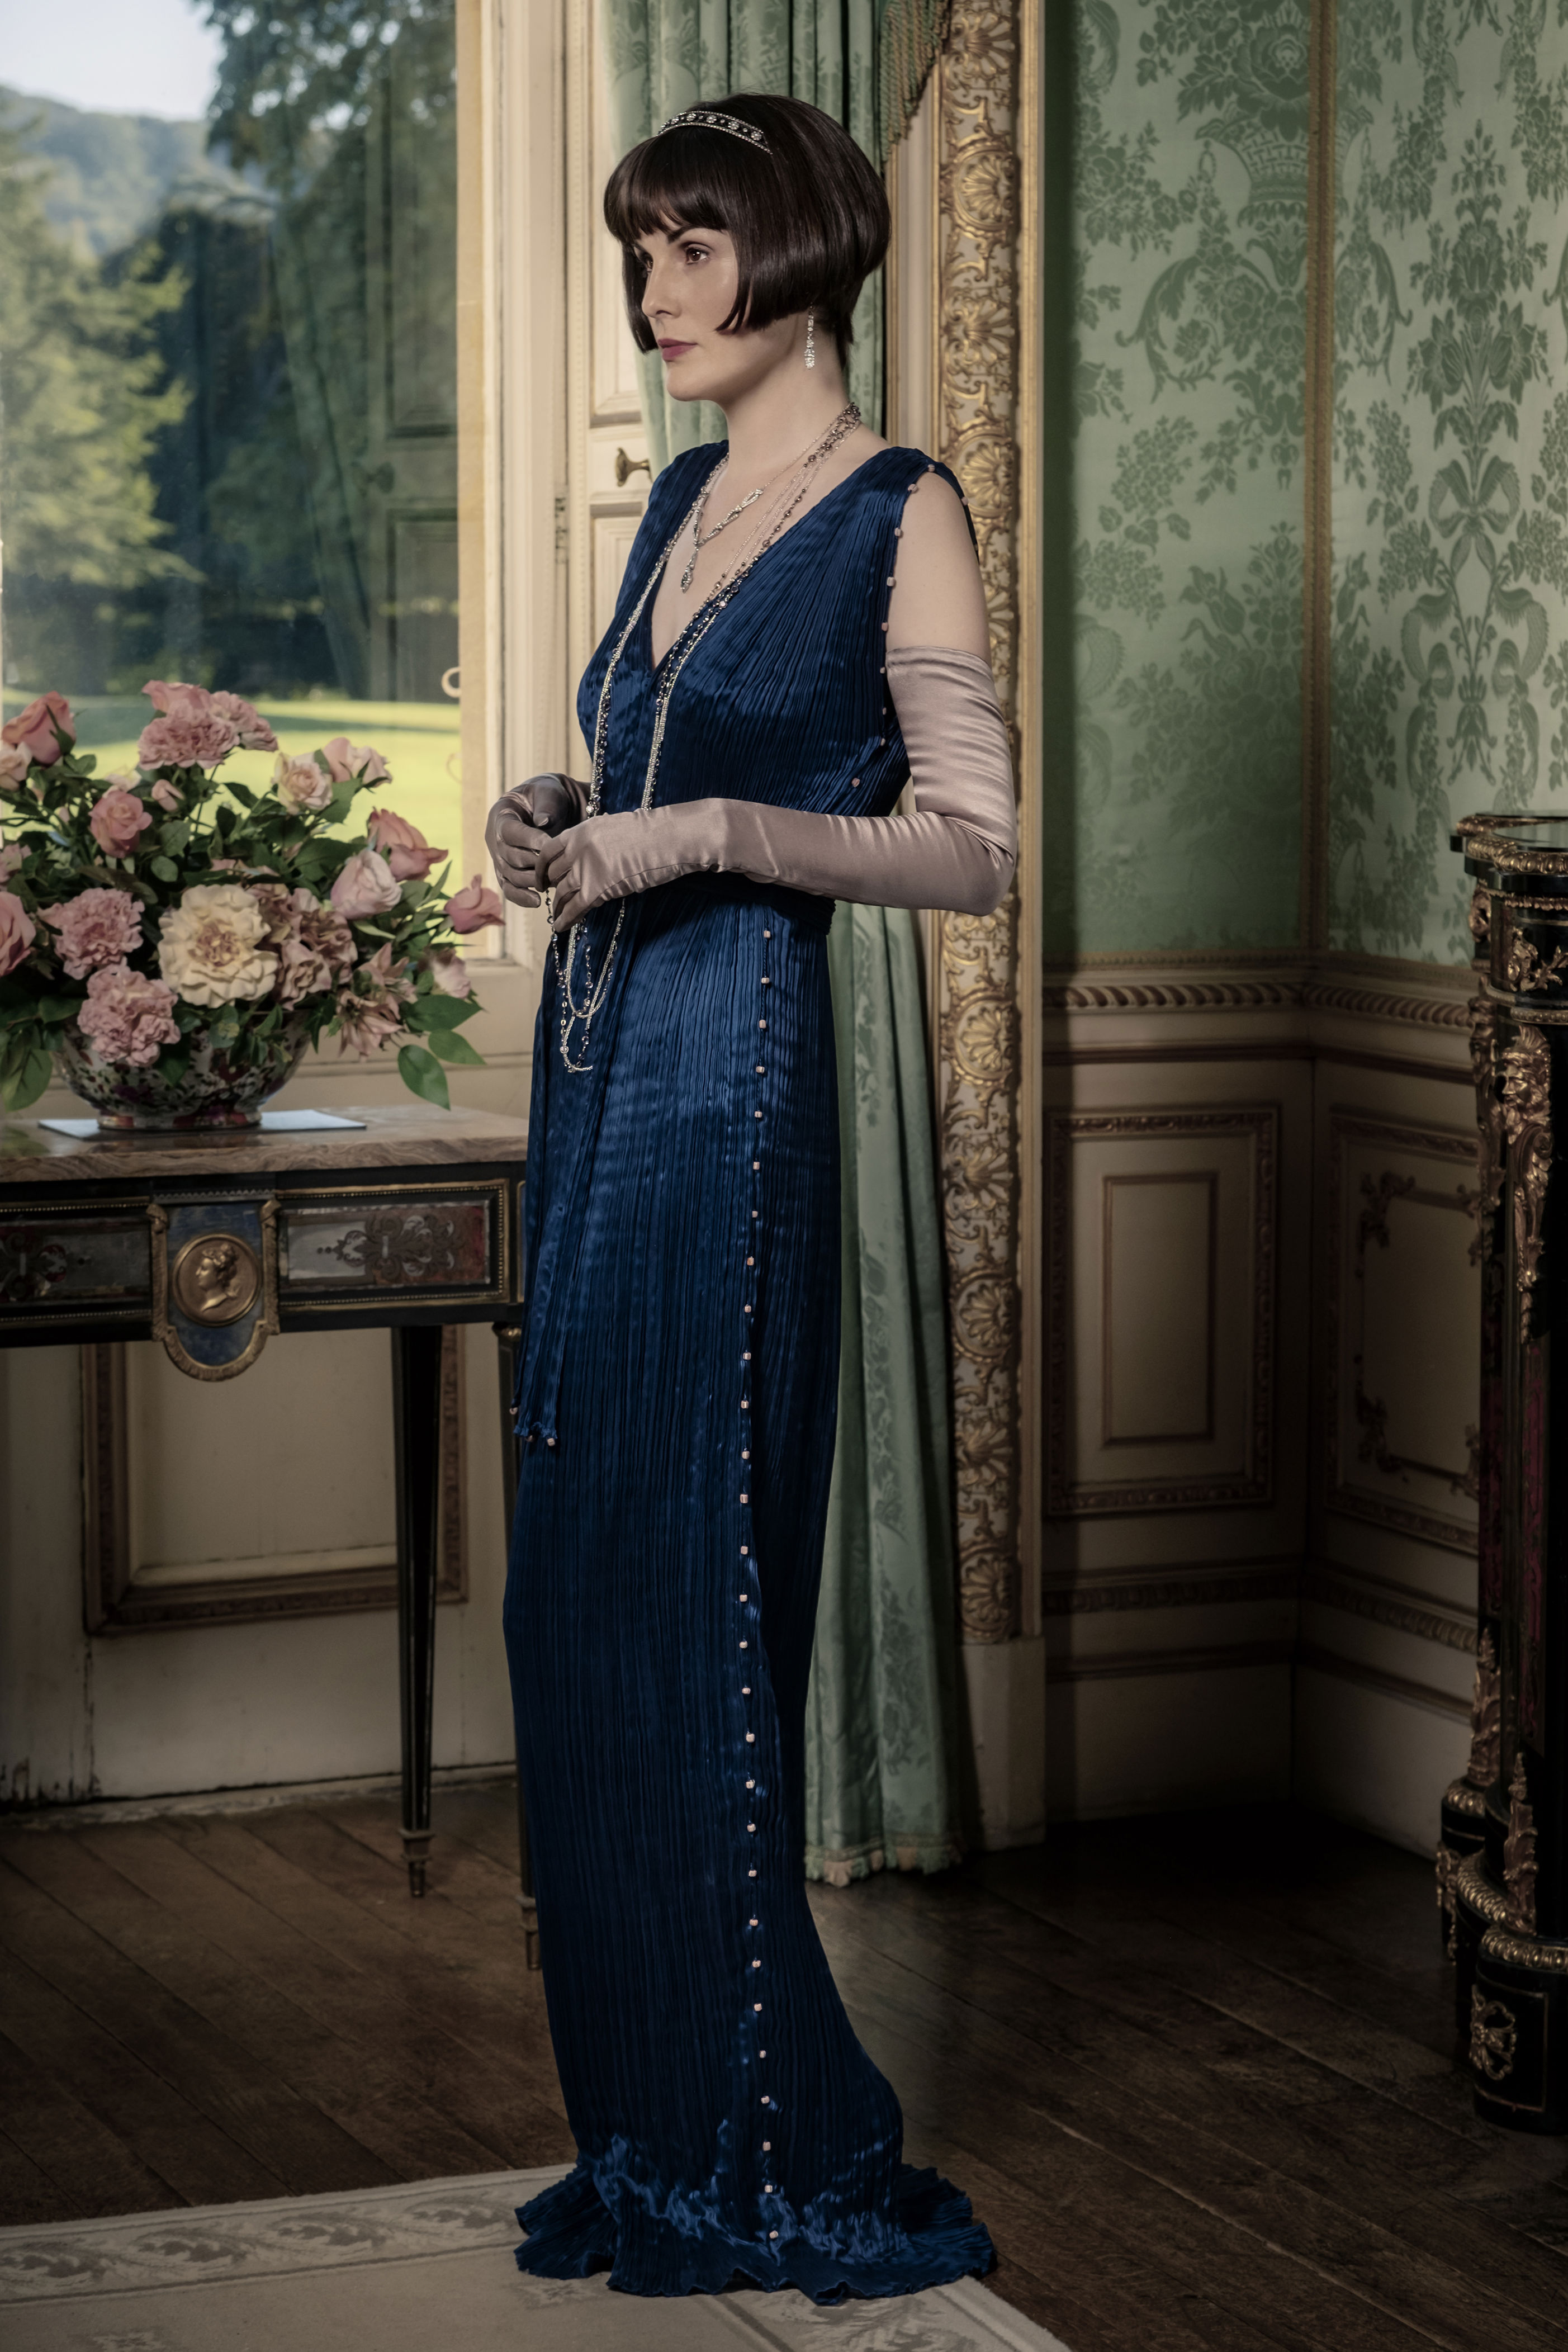 <p><span>For a royal luncheon at Downton Abbey in the 2019 film, Lady Mary donned costume designer Anna Mary Scott Robbins' version of a Fortuny Delphos gown. "I first worked with the legendary textile house Fortuny @fortunyvenezia on the final series of Downton Abbey and this led to a collaboration with them to create a bespoke pleated gown for Lady Mary," Anna wrote on Instagram alongside a </span><a href="https://www.instagram.com/p/B1uB_pegtA3/">sketch</a><span> of the look. "This unique dress is neither vintage nor a replica -- it is a 'new' original, having unlocked the famous and secret pleating technique developed by Mariano Fortuny and his wife and muse, Henriette, and is entirely hand sewn. The silk was dyed to a brilliant, rich Prussian blue that becomes glossier and more luminous after pleating."</span></p>